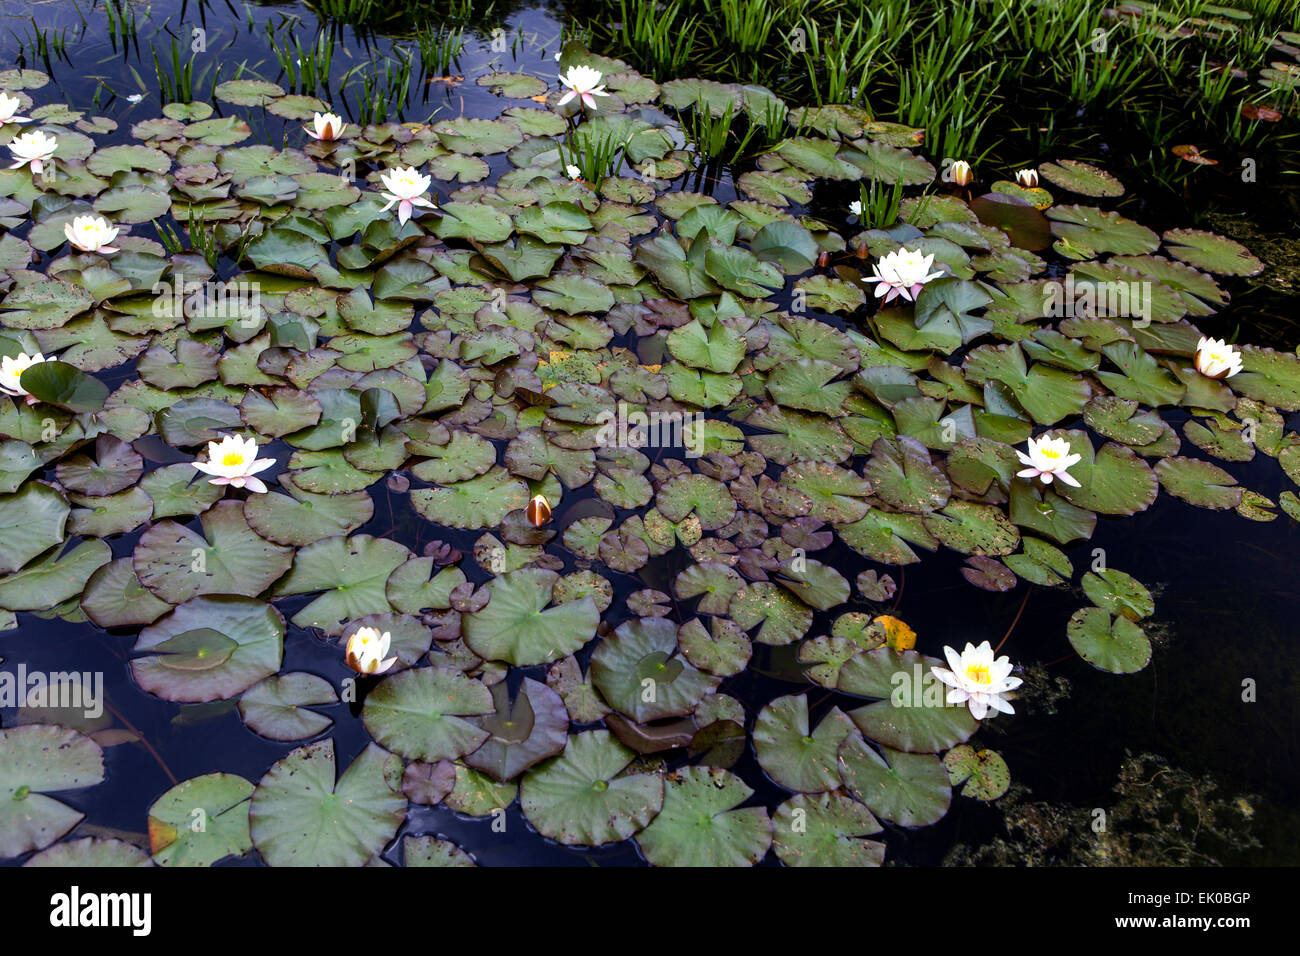 Pond with water lilies floating Stock Photo